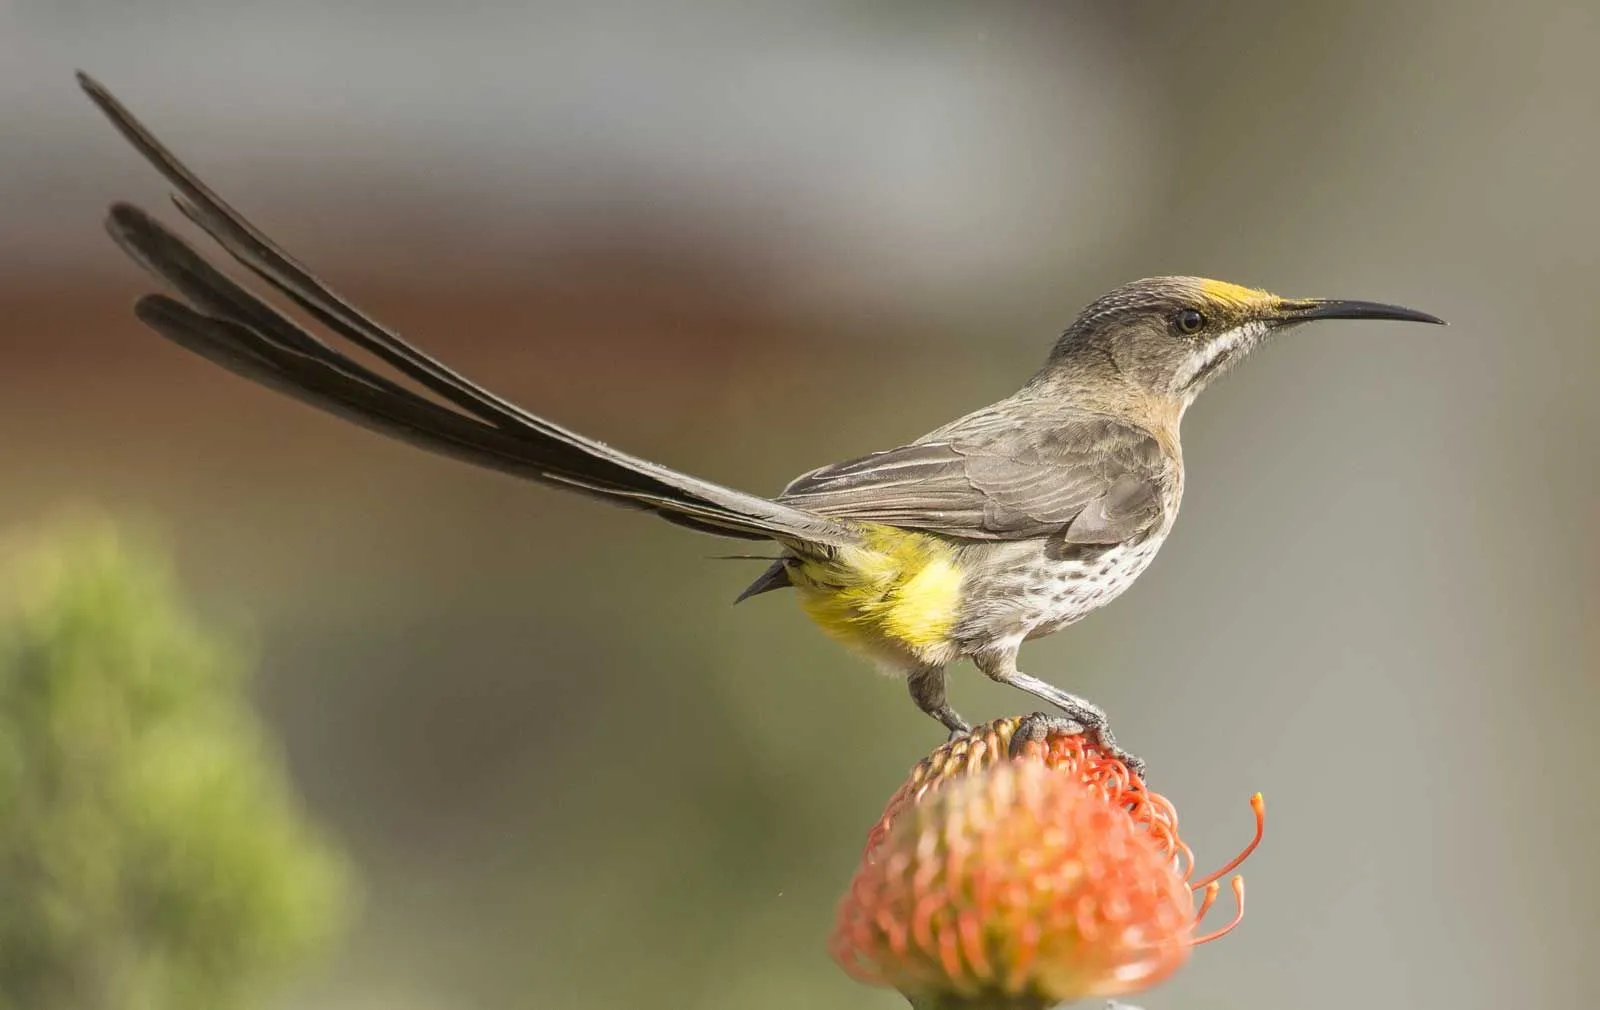 Sugarbird facts The sugarbird is one of the eight species of birds that are related to the provinces of Fynbos biome in the Eastern and Western Cape of South Africa